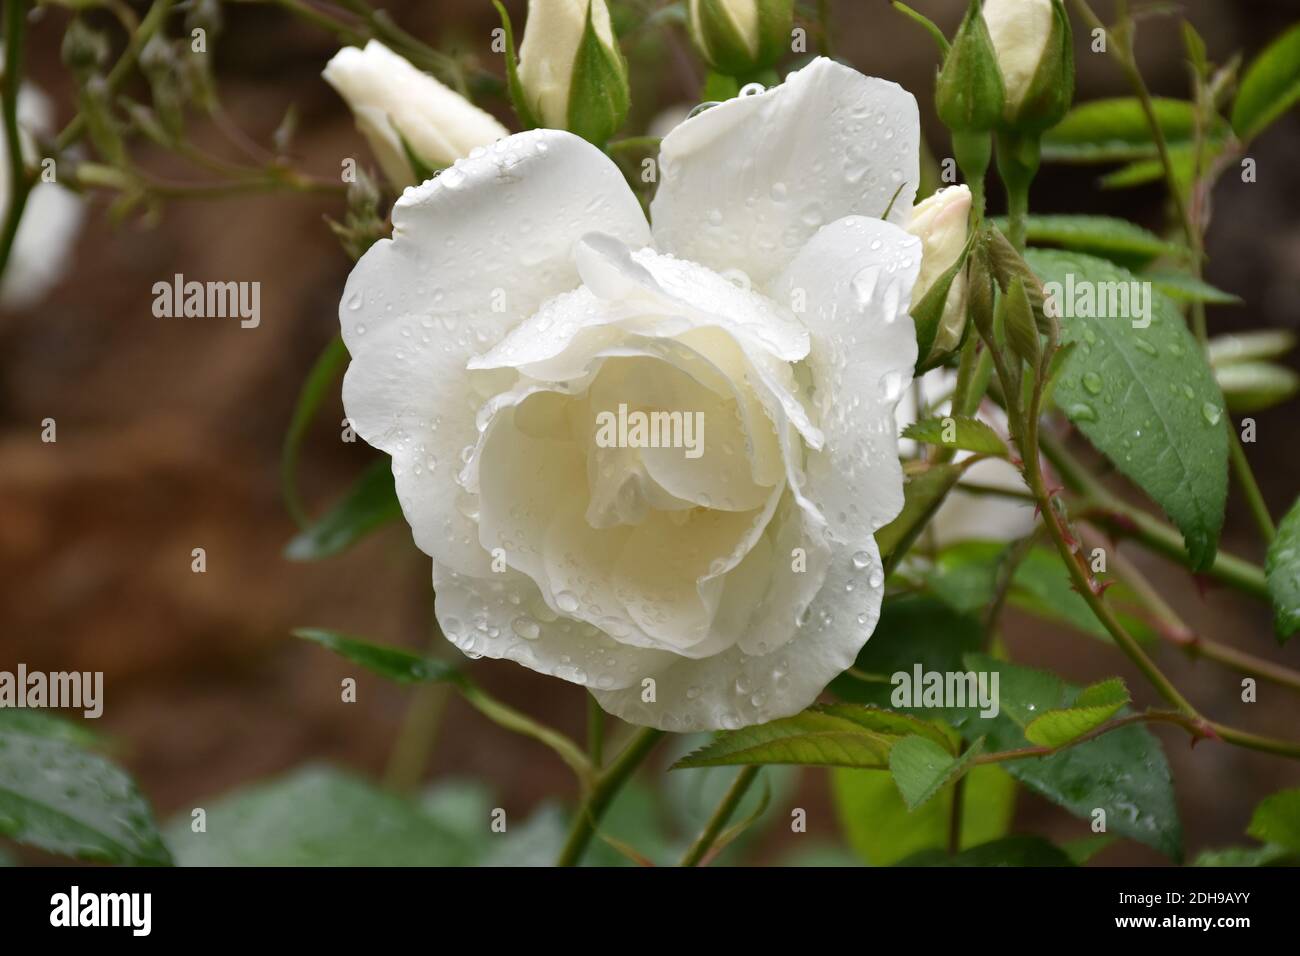 White rose with raindrops, symbol of innocence, charm and purity. Stock Photo